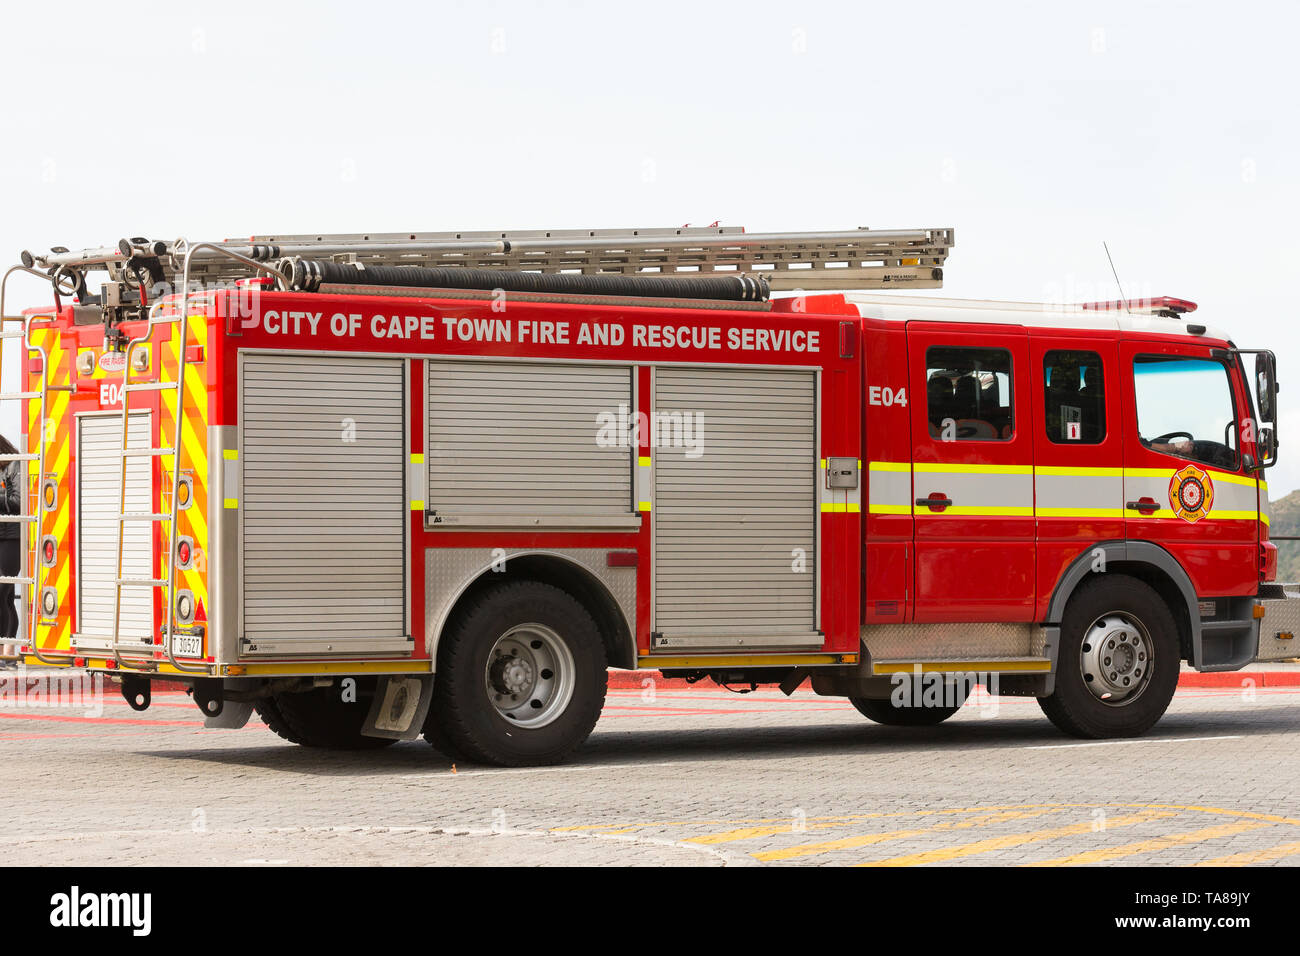 City of Cape Town fire and rescue service truck or engine in the street patrolling the area around Table Mountain National Park Cape Town South Africa Stock Photo